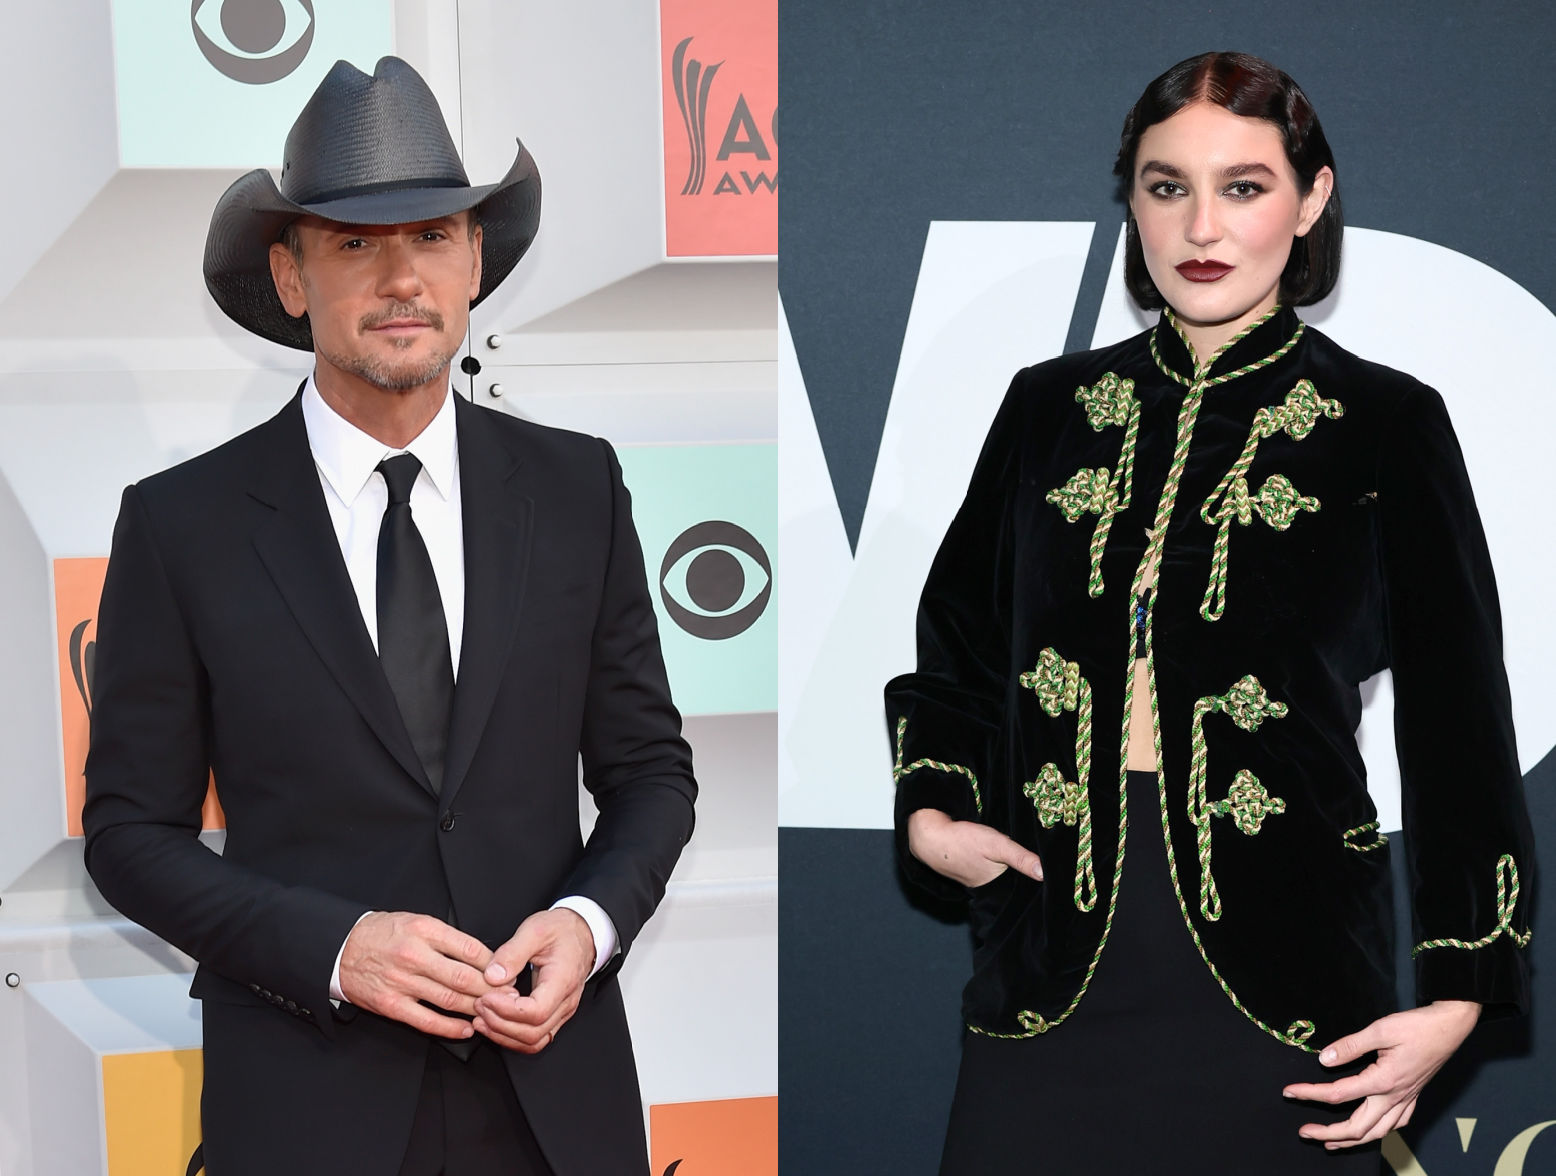 Tim McGraw and Faith Hill's Daughter Nails Queen Cover